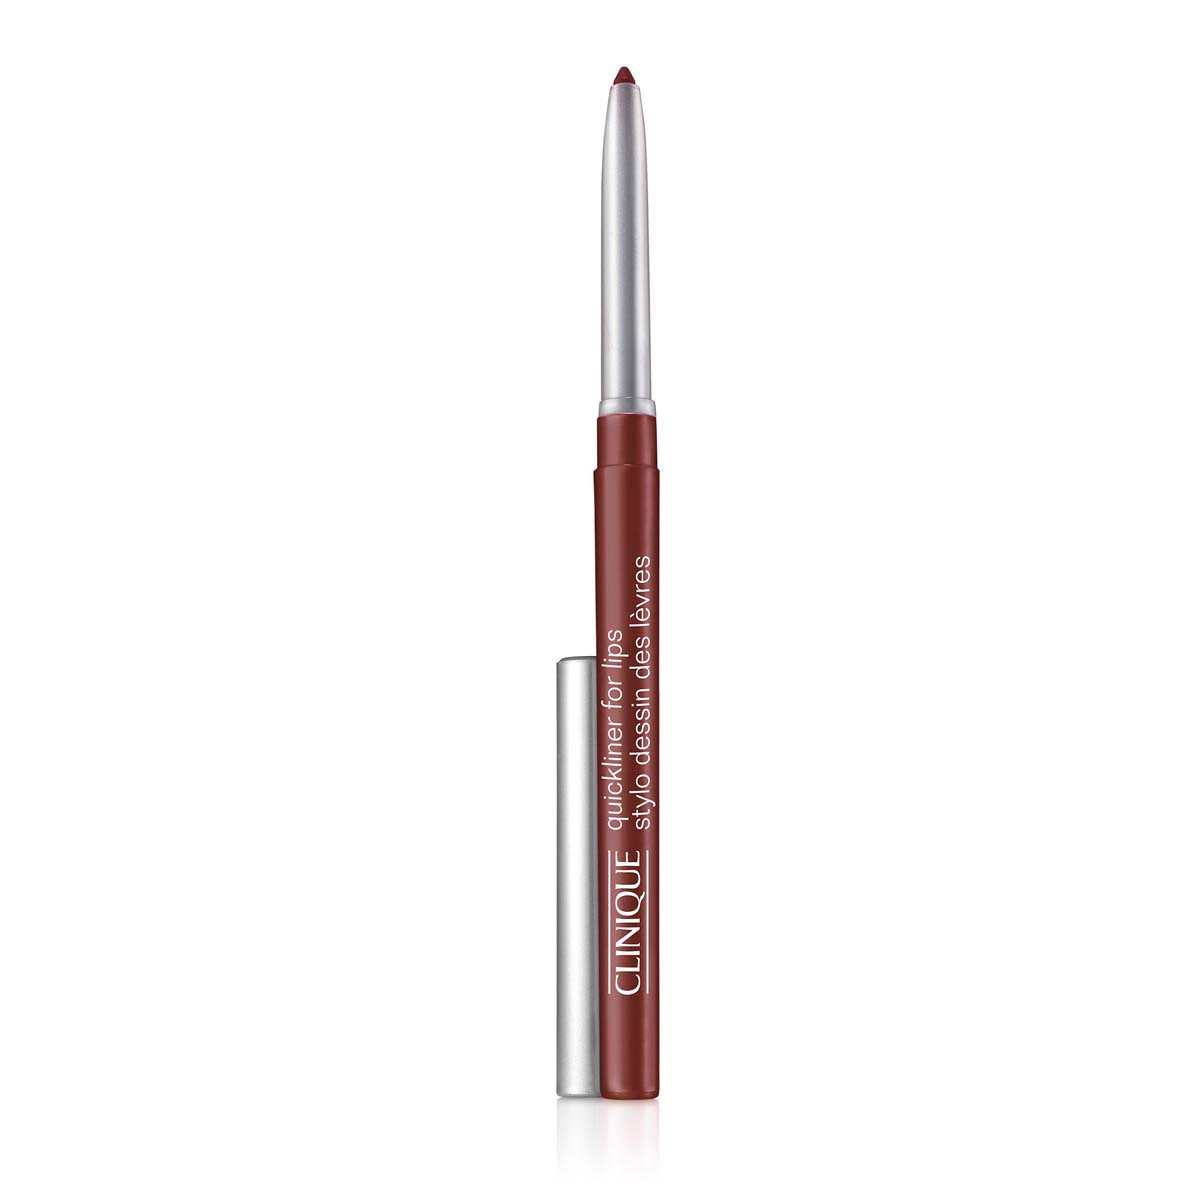 Clinique quicklinerTM for lips - 48 bing cherry   3 g, 48 BING CHERRY, large image number 0